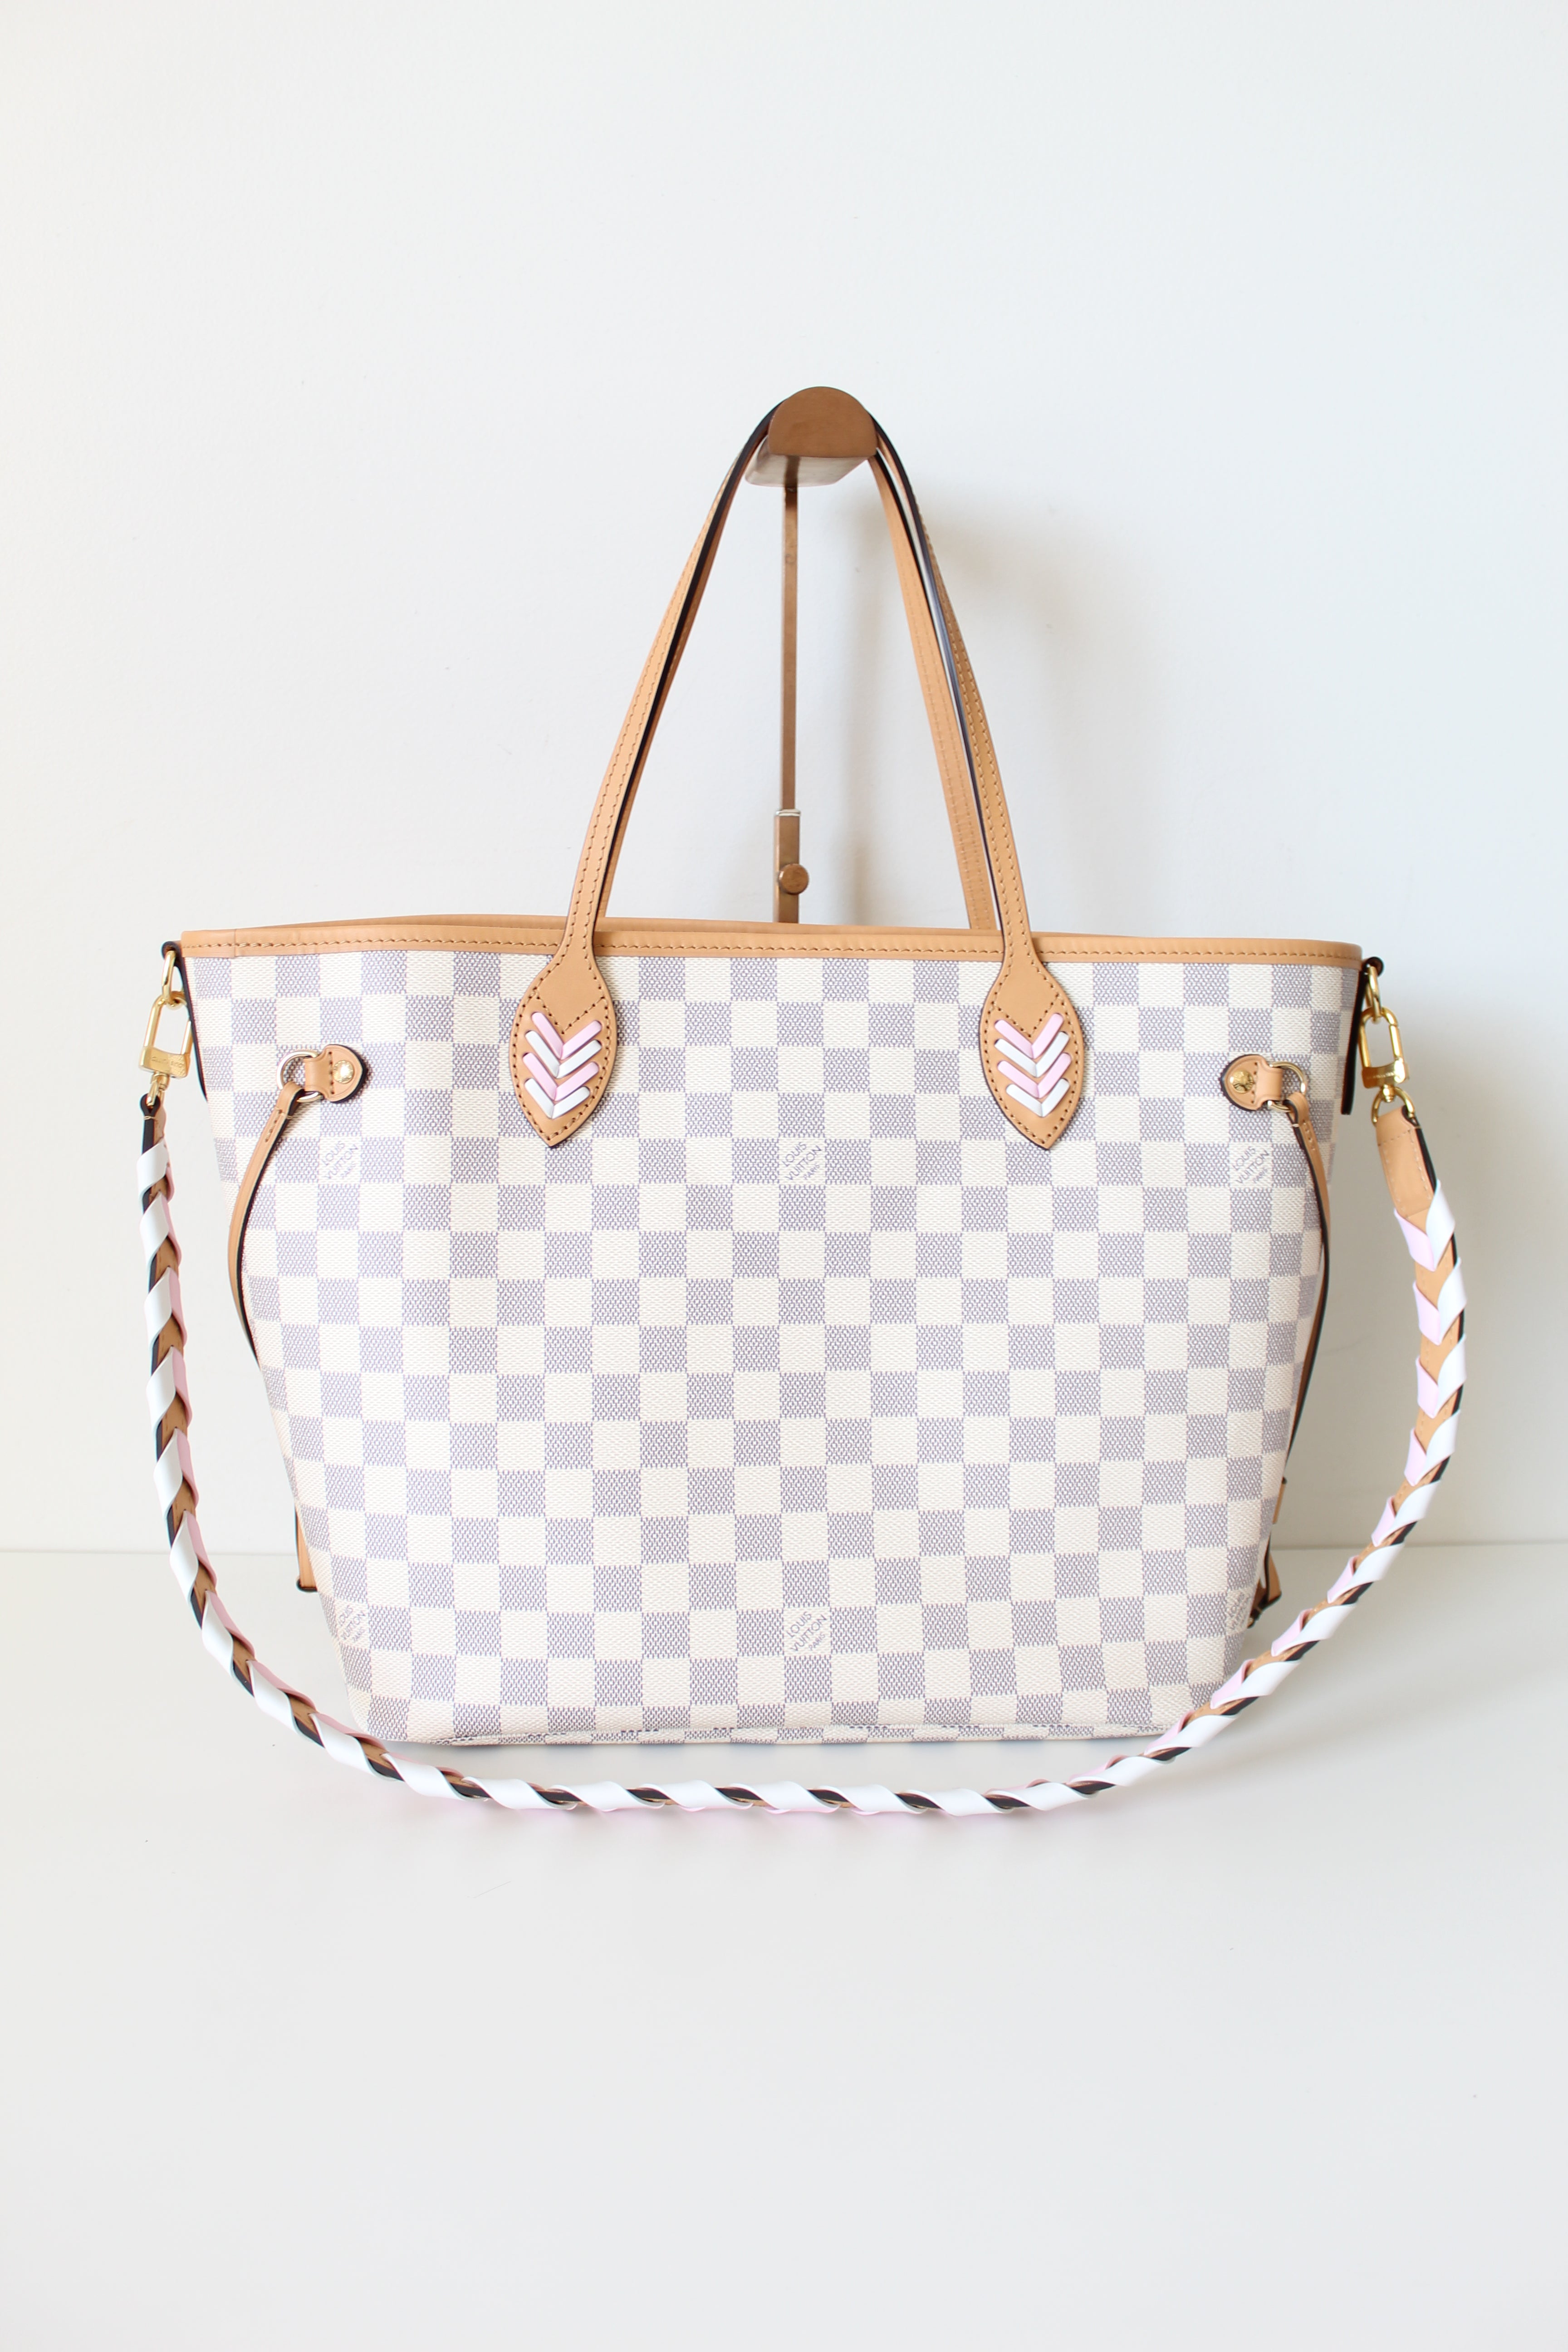 louis vuitton neverfull side straps